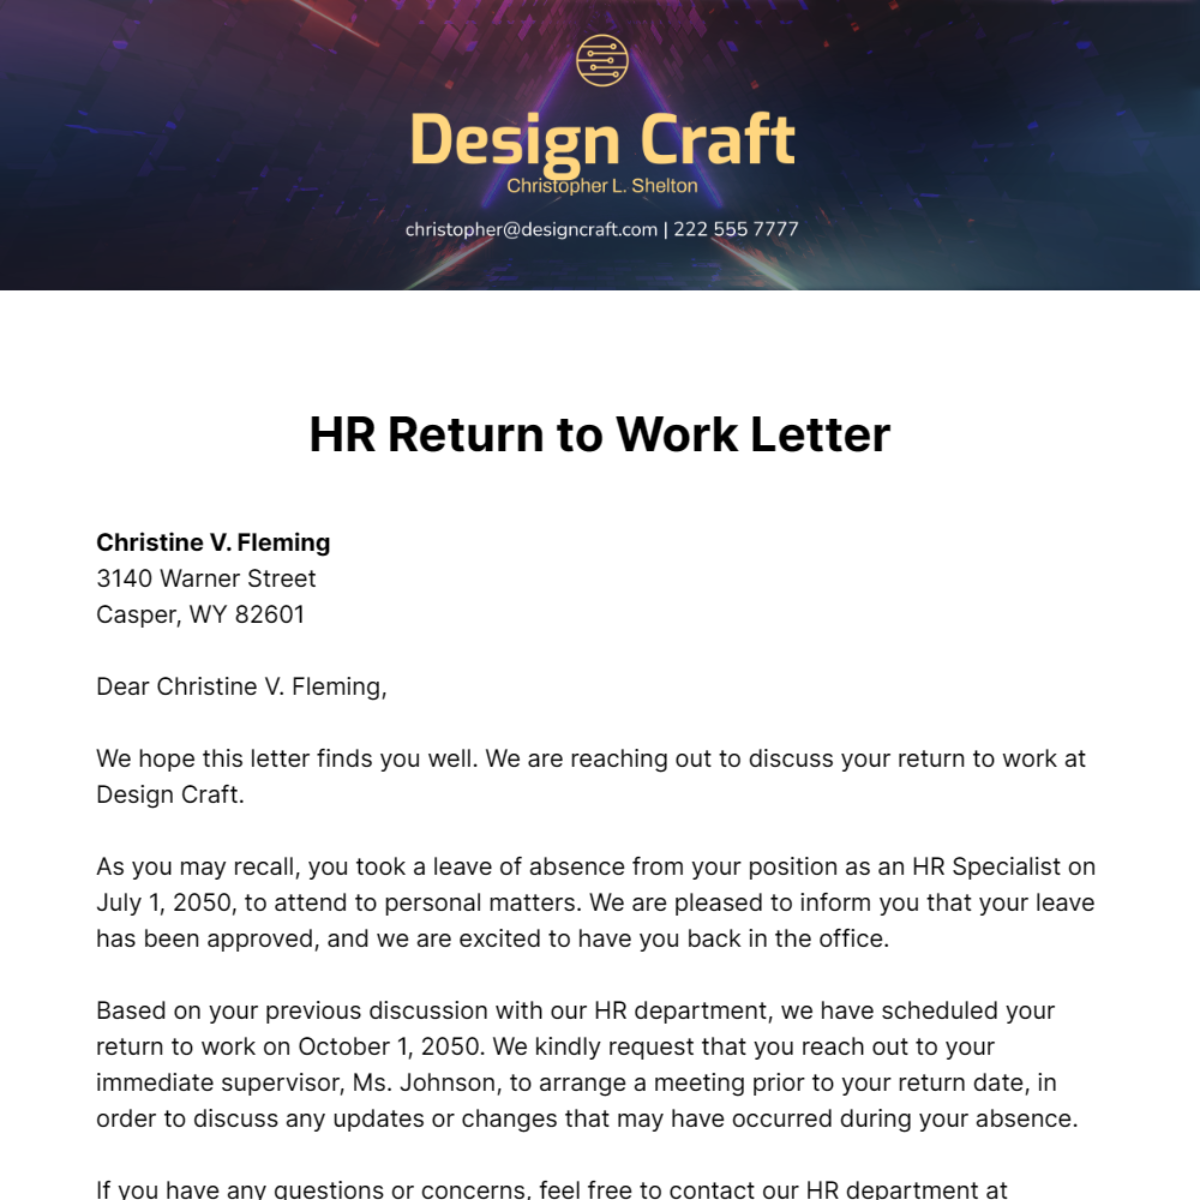 HR Return to Work Letter Template